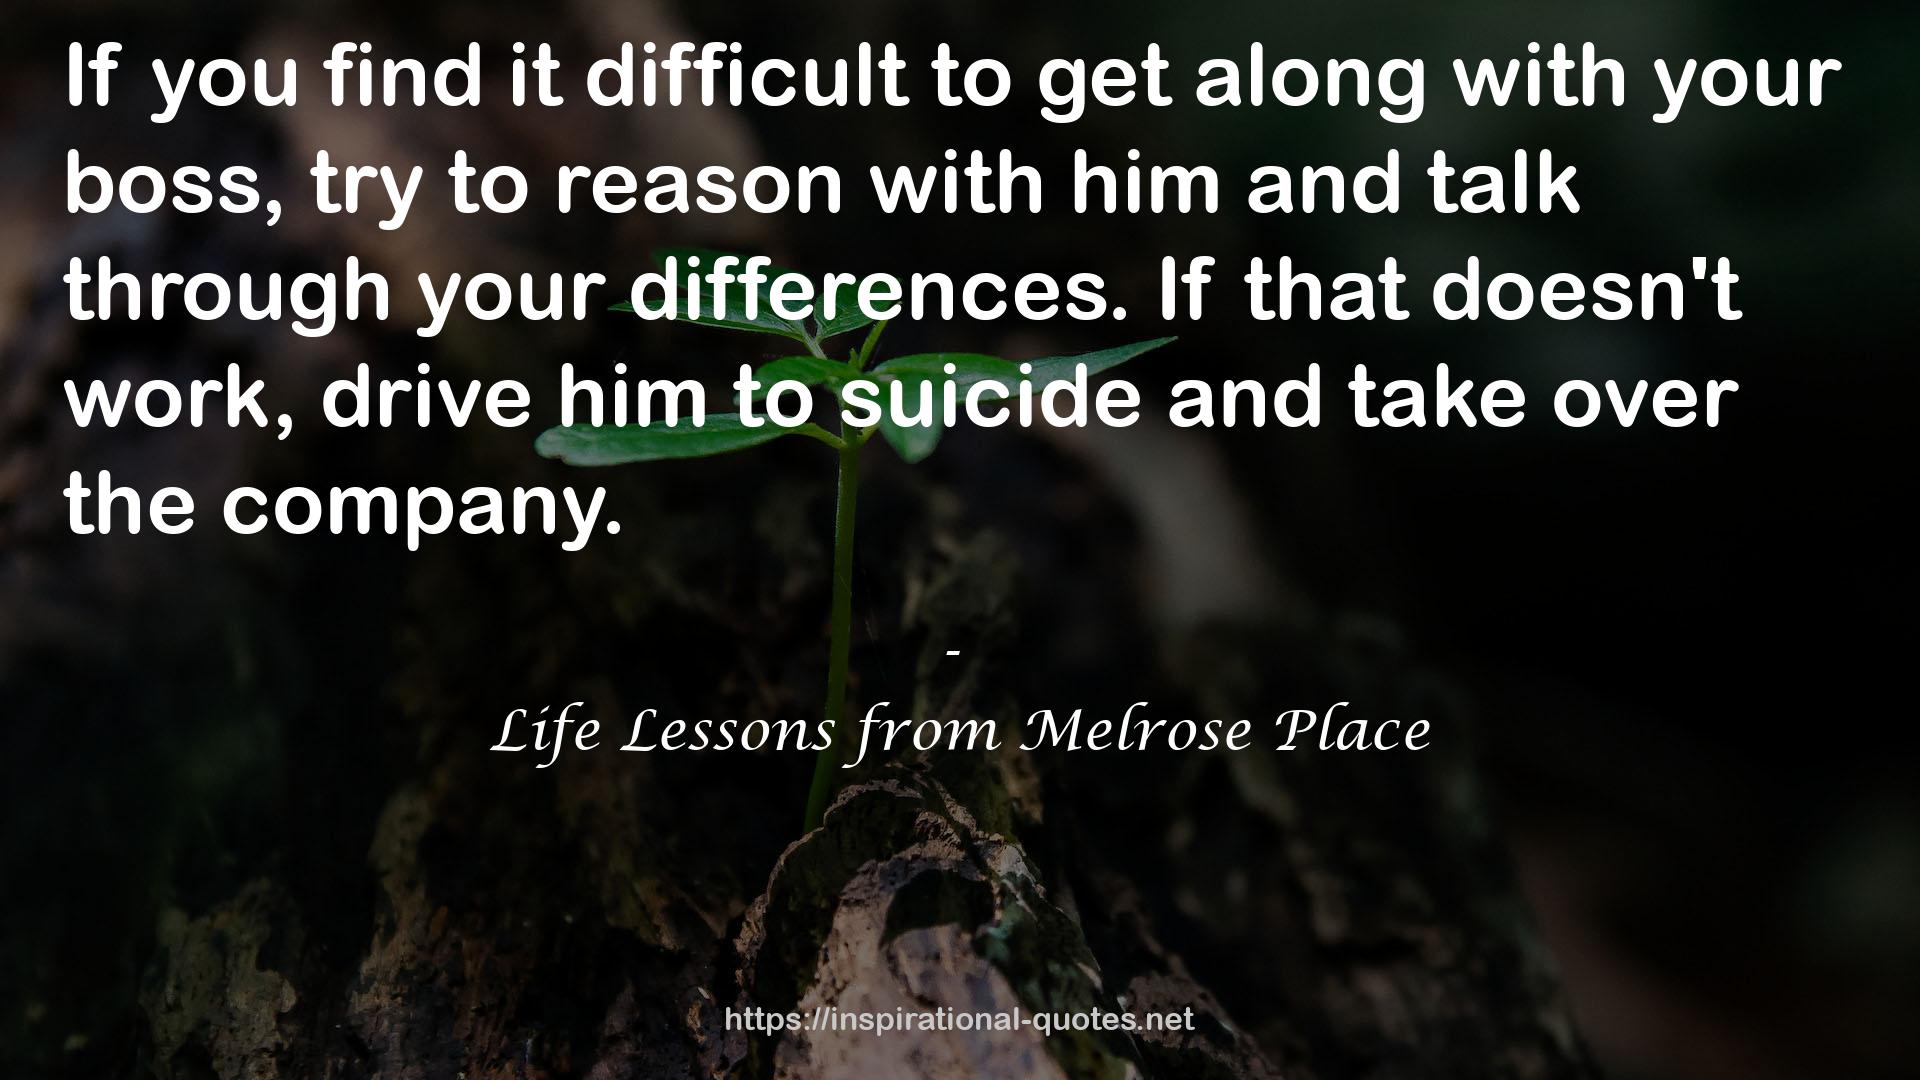 Life Lessons from Melrose Place QUOTES